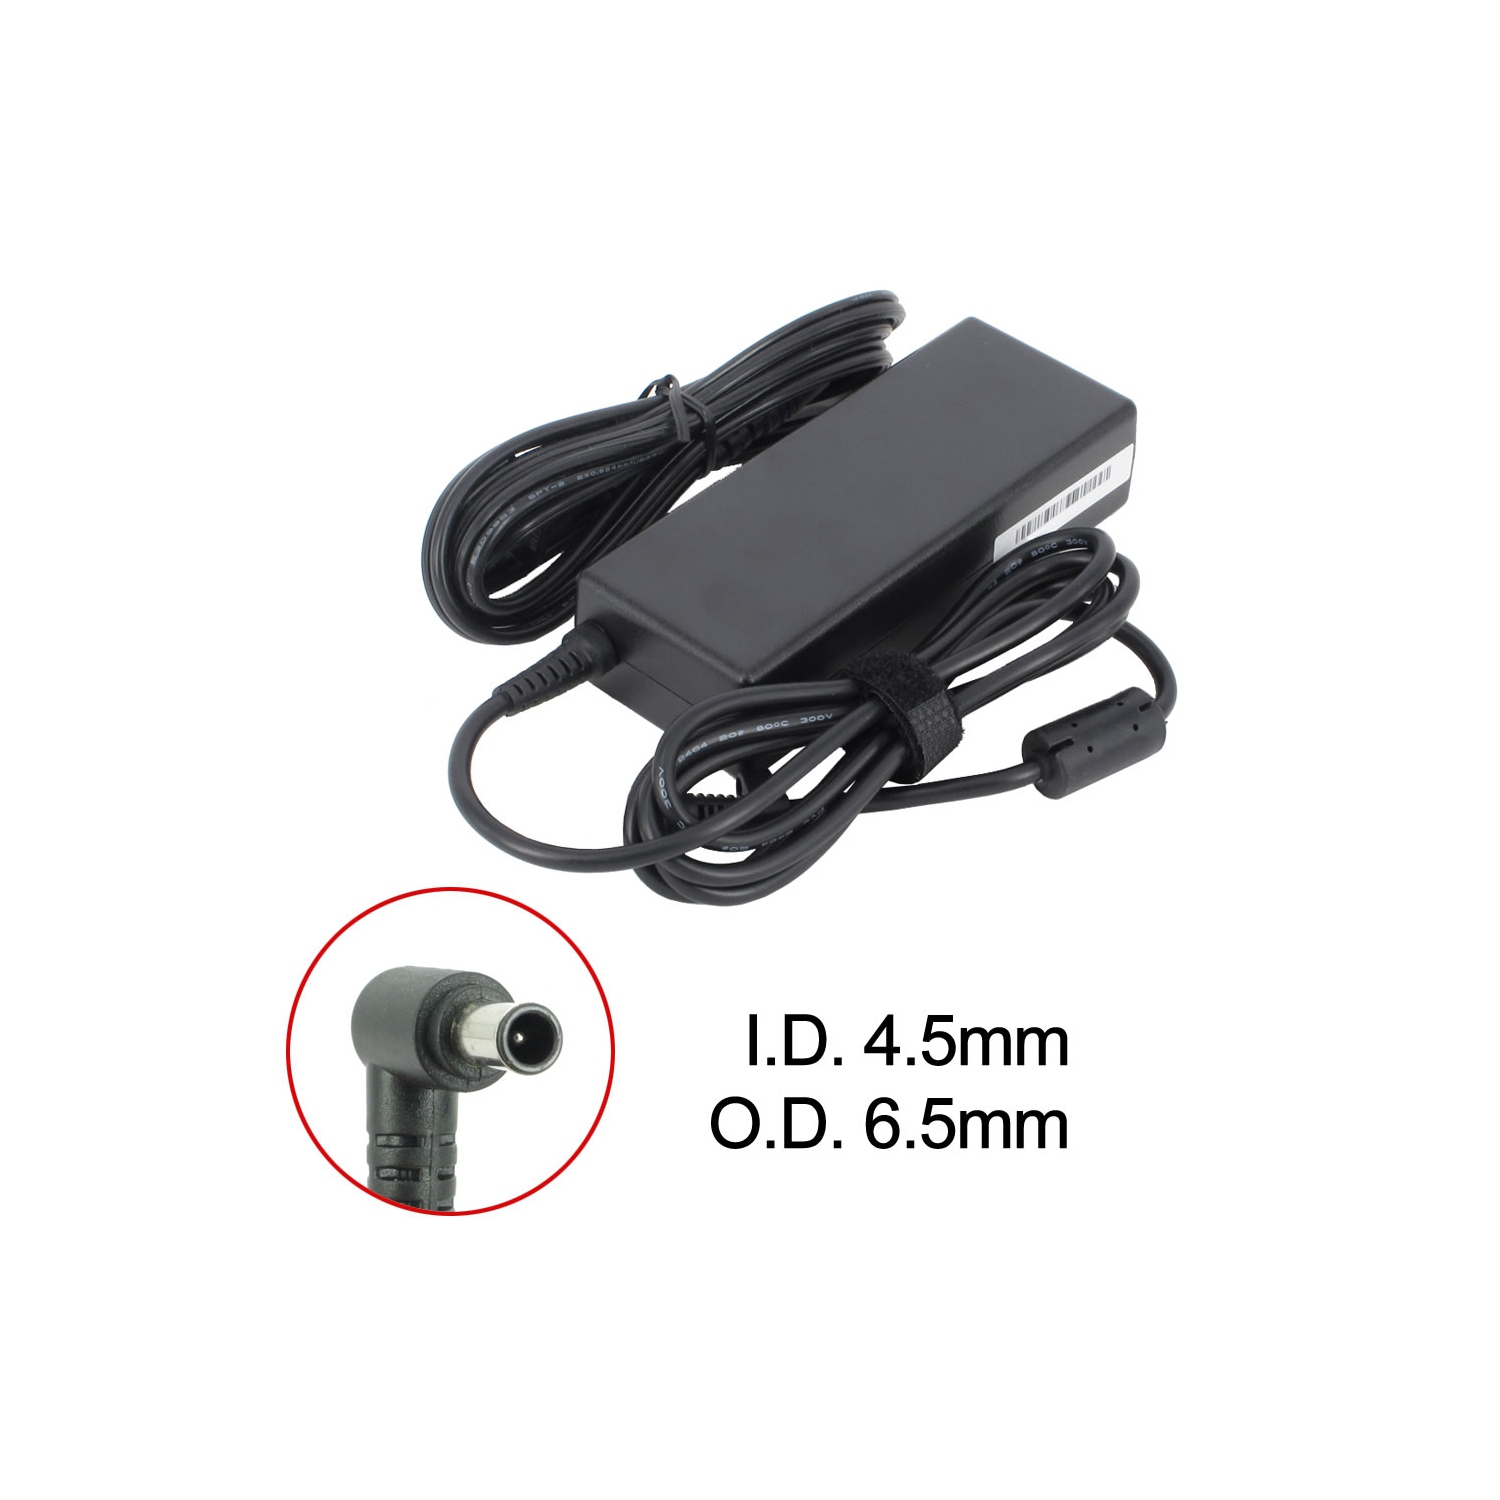 Brand New Laptop AC Adapter for Sony VAIO VGN-C240QE, PCGA-AC19V10, PCGA-AC19V3, VGP-AC19V20, VGP-AC19V30, VGP-AC19V51